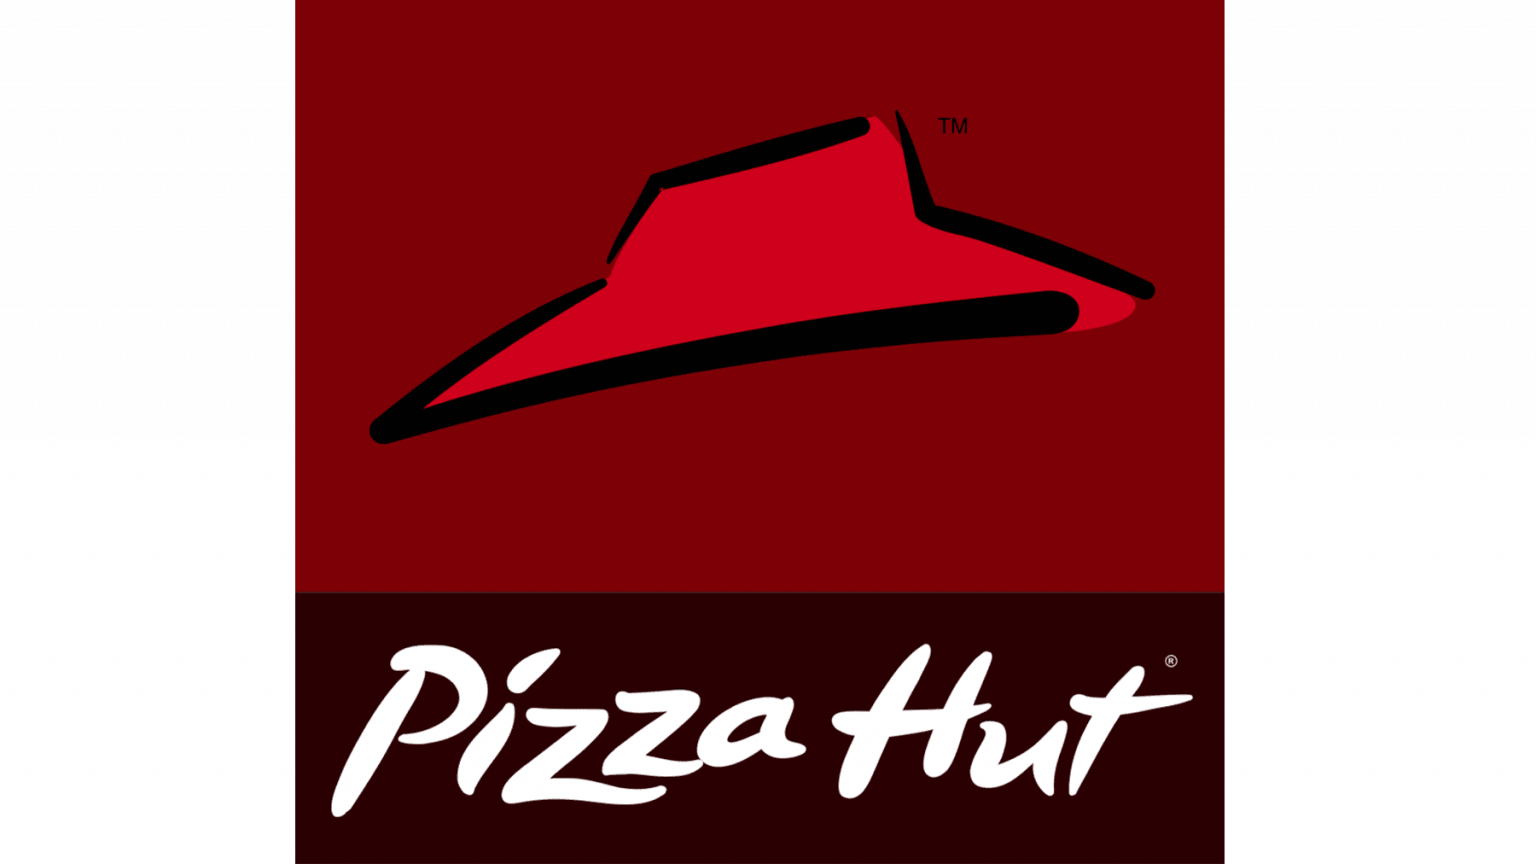 Enjoy a special kind of pizza experience with Pizza Hut!